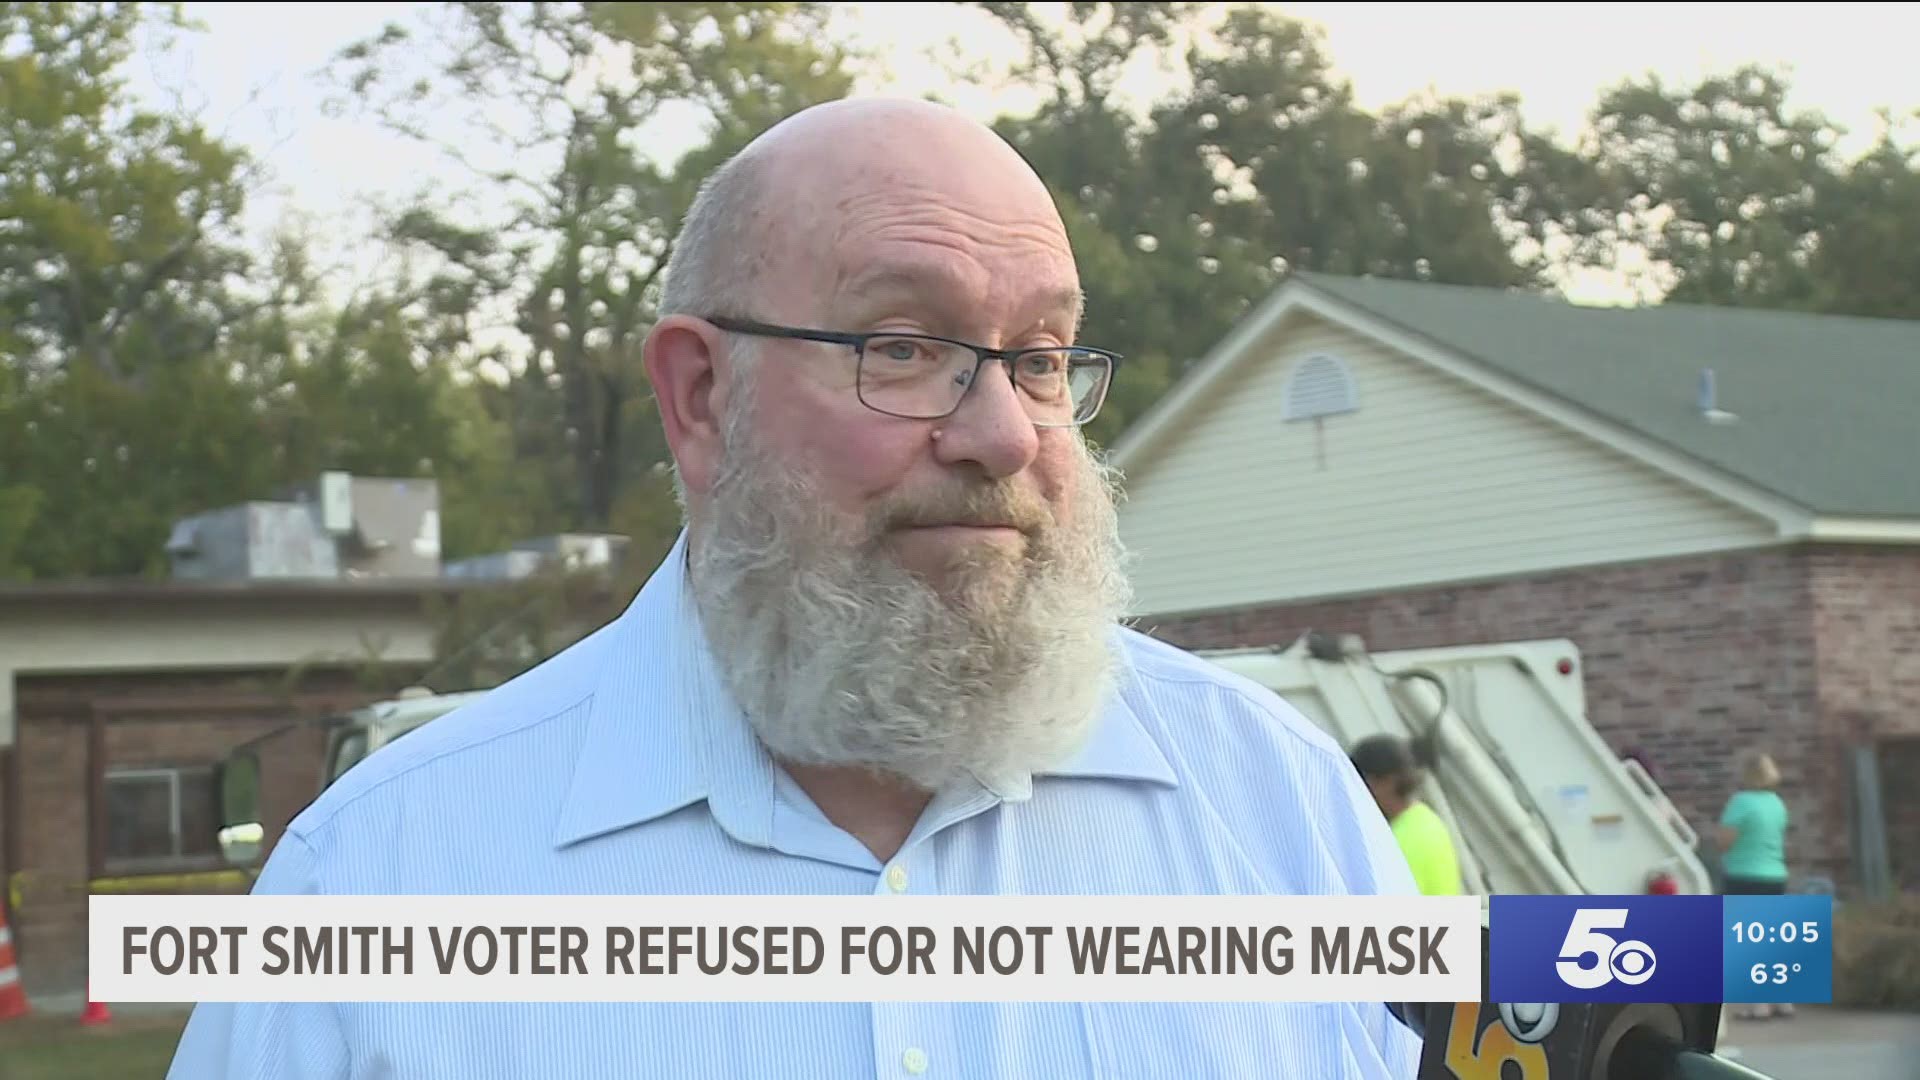 Fort Smith voter refused for not wearing a mask.